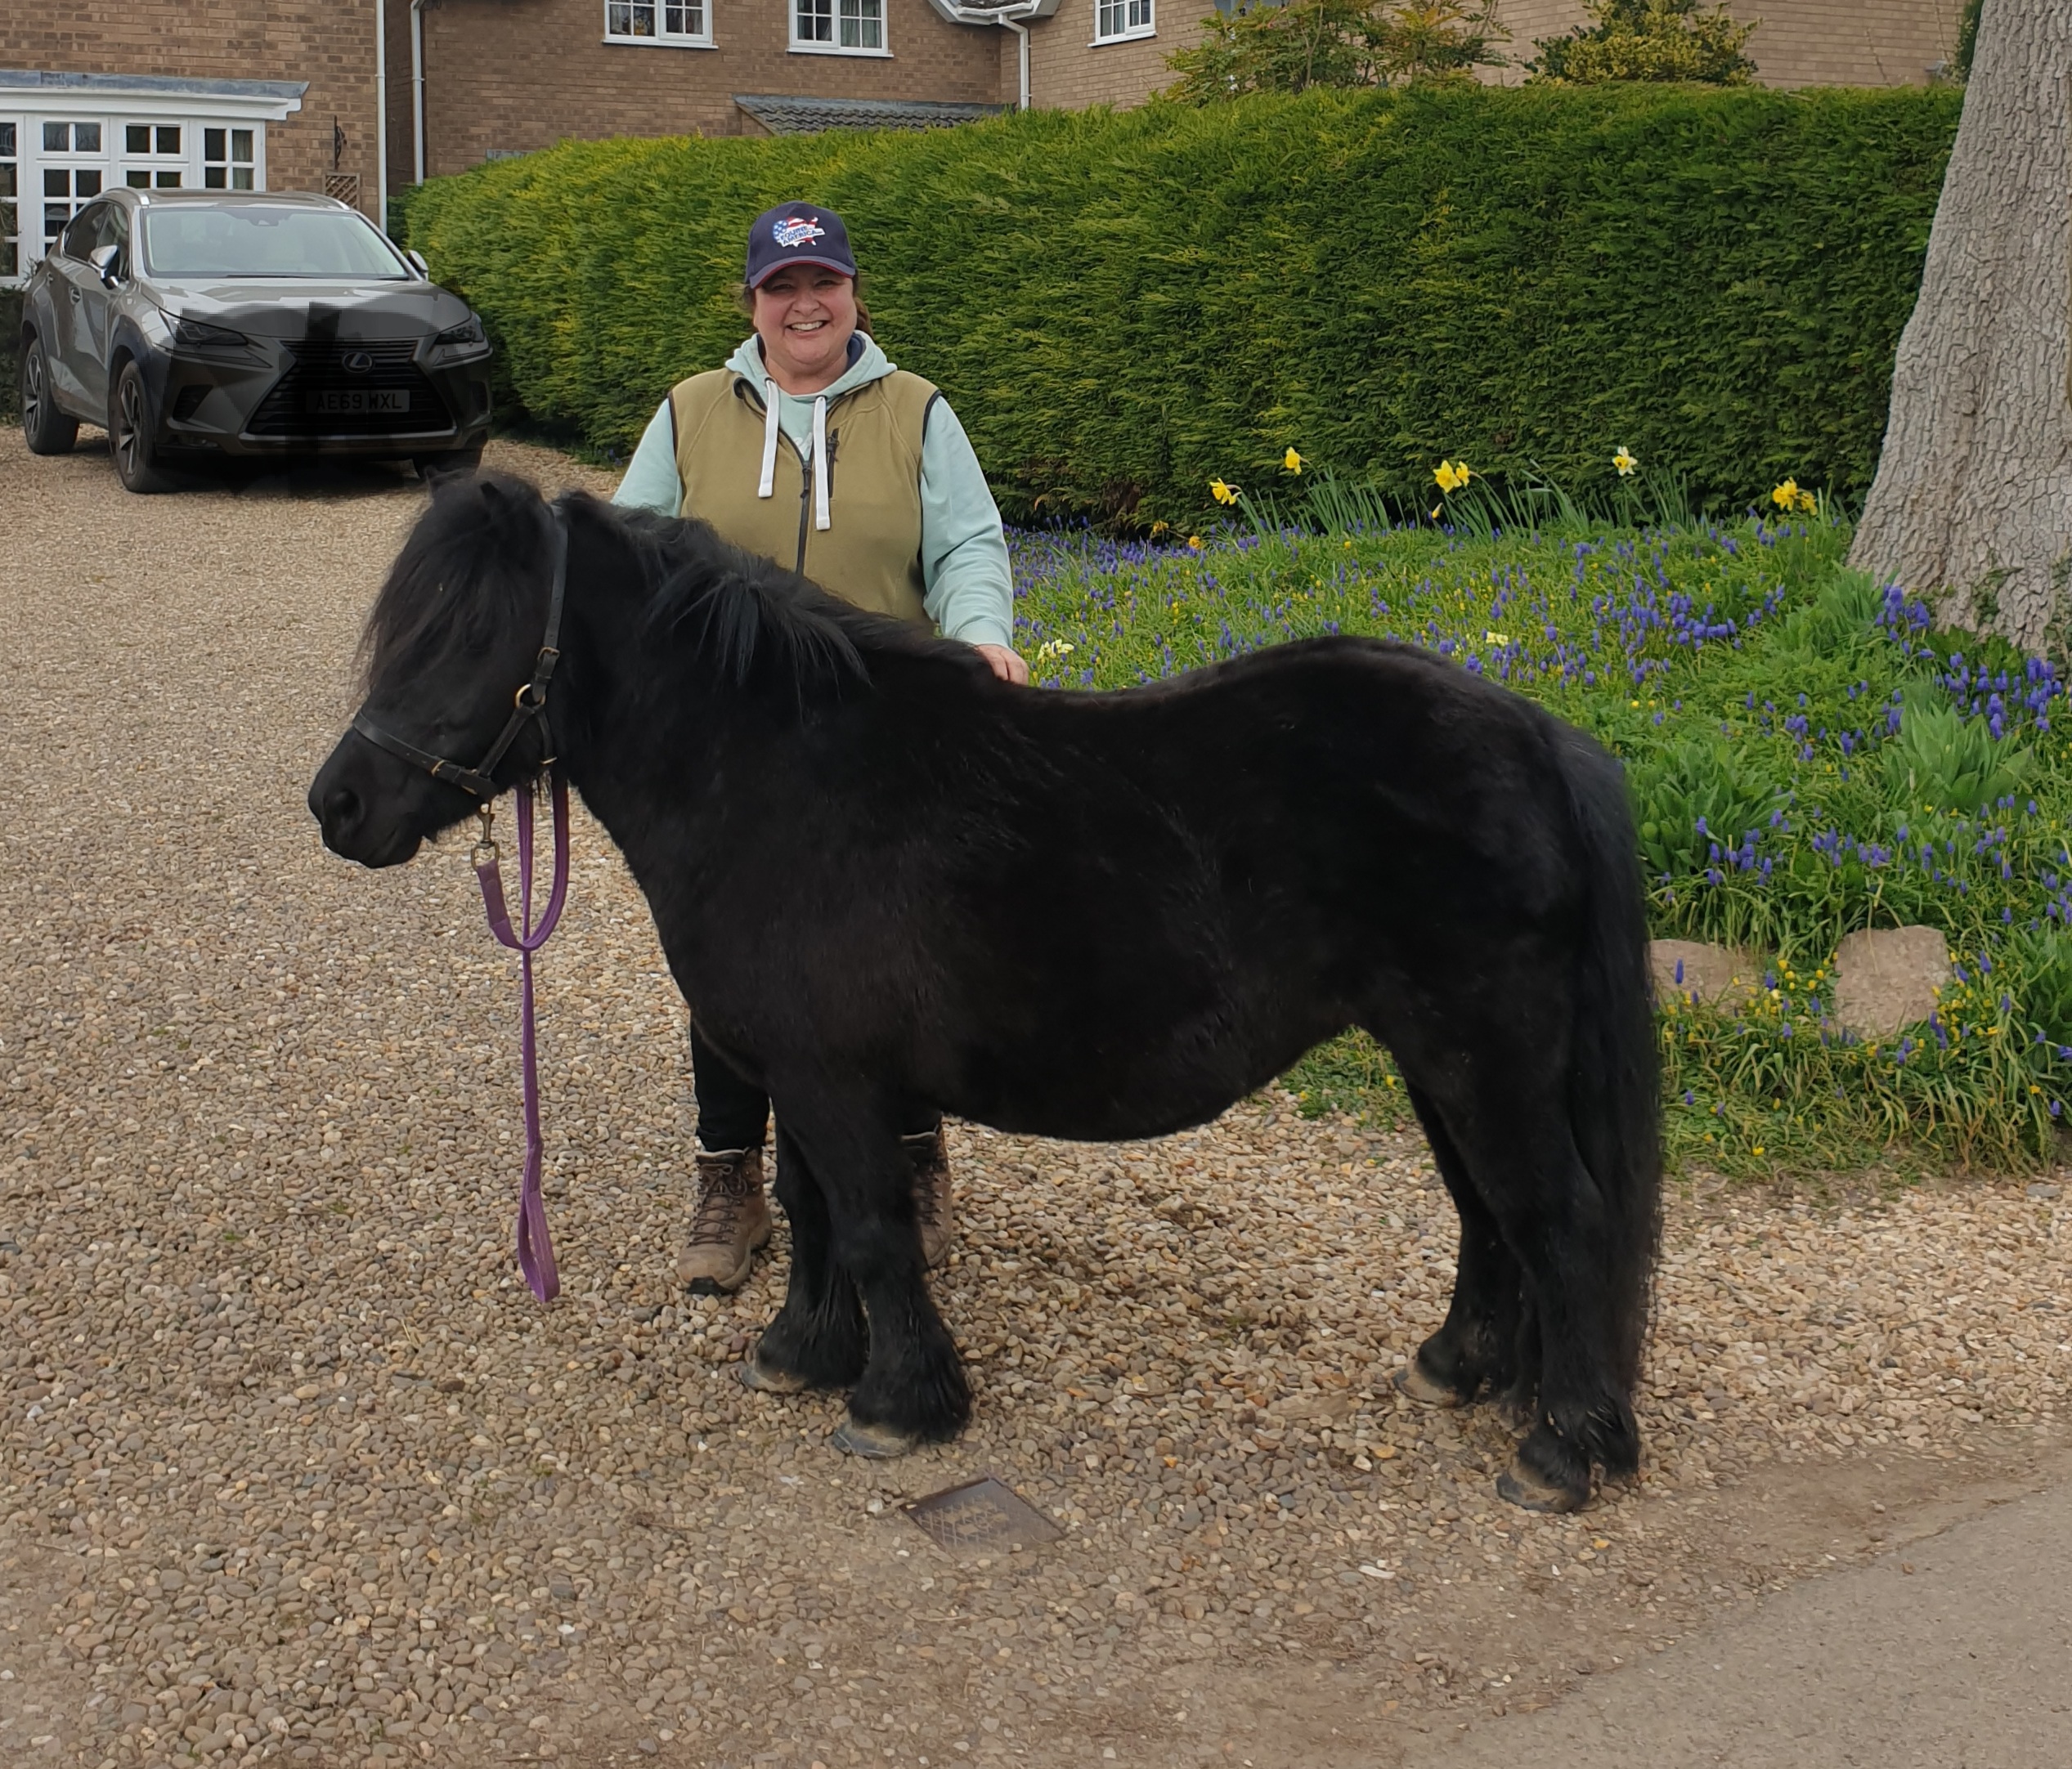 The Not-So-Secret Diary of Diva the Shetland Pony - New Routines